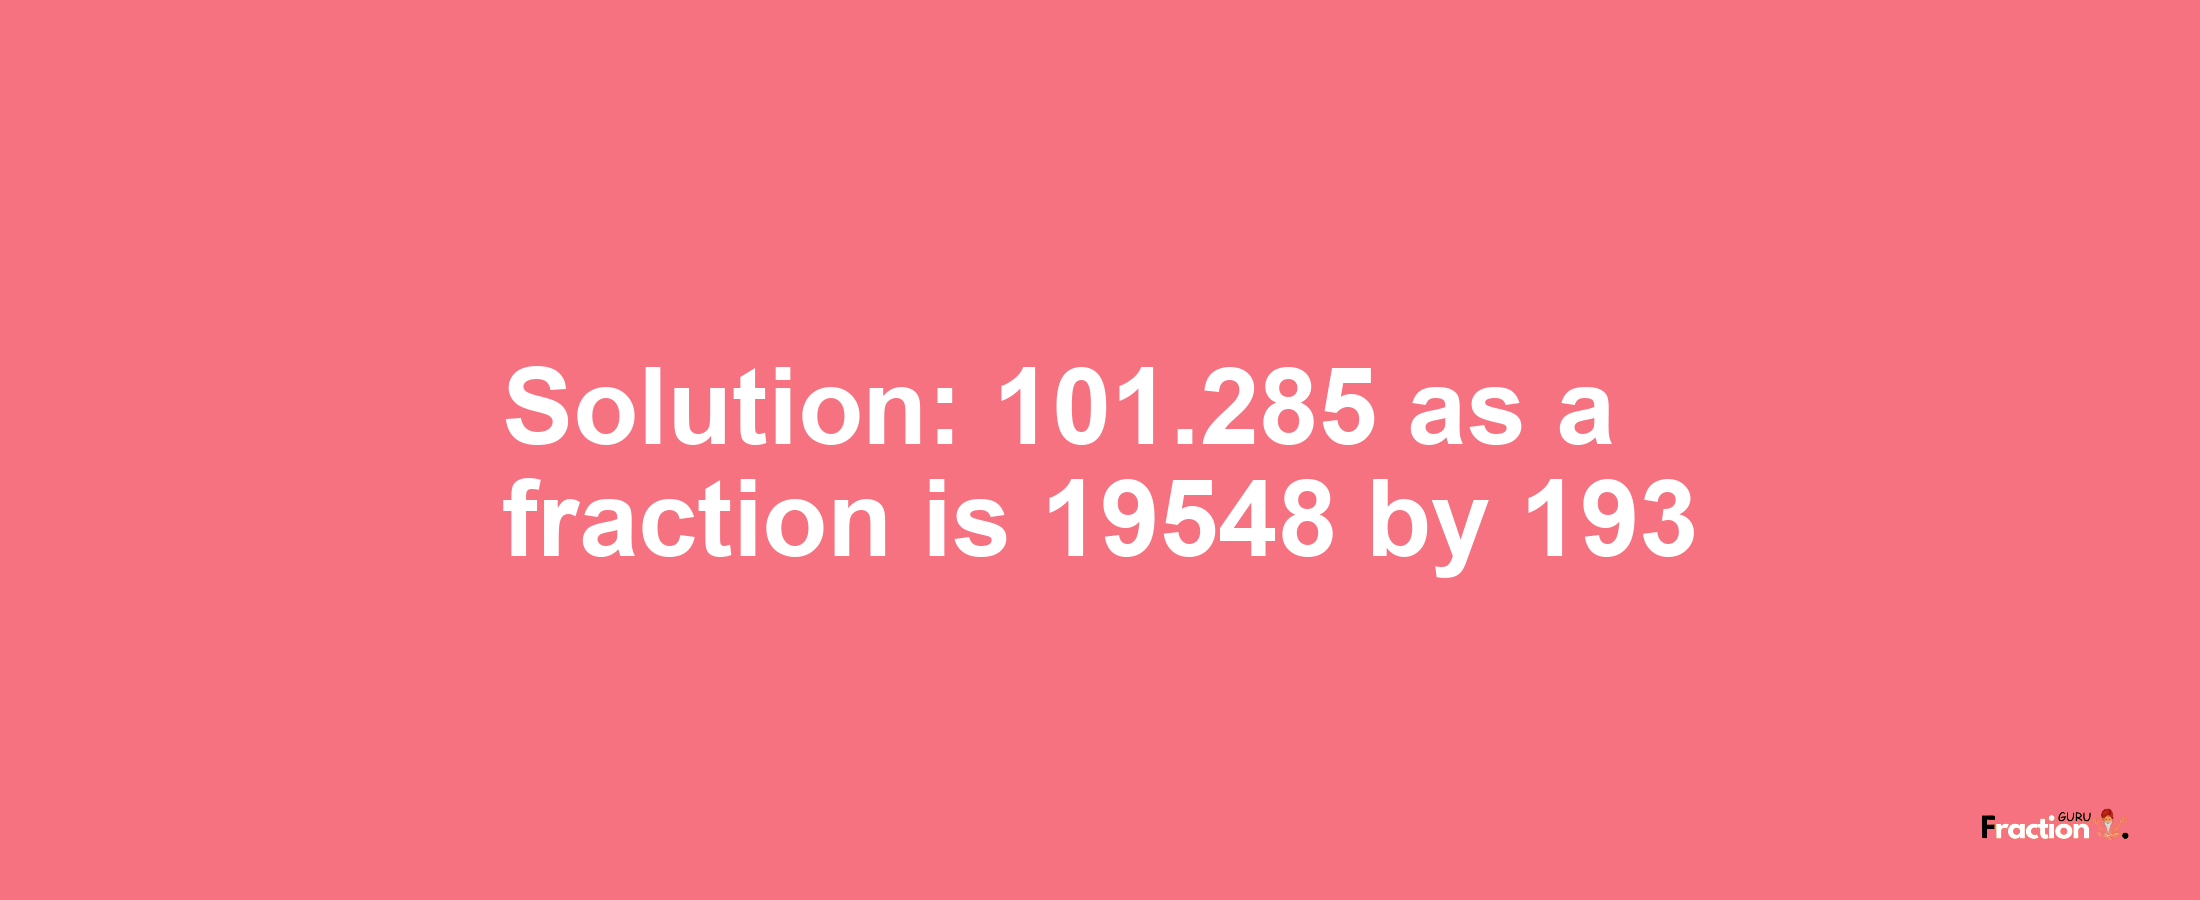 Solution:101.285 as a fraction is 19548/193